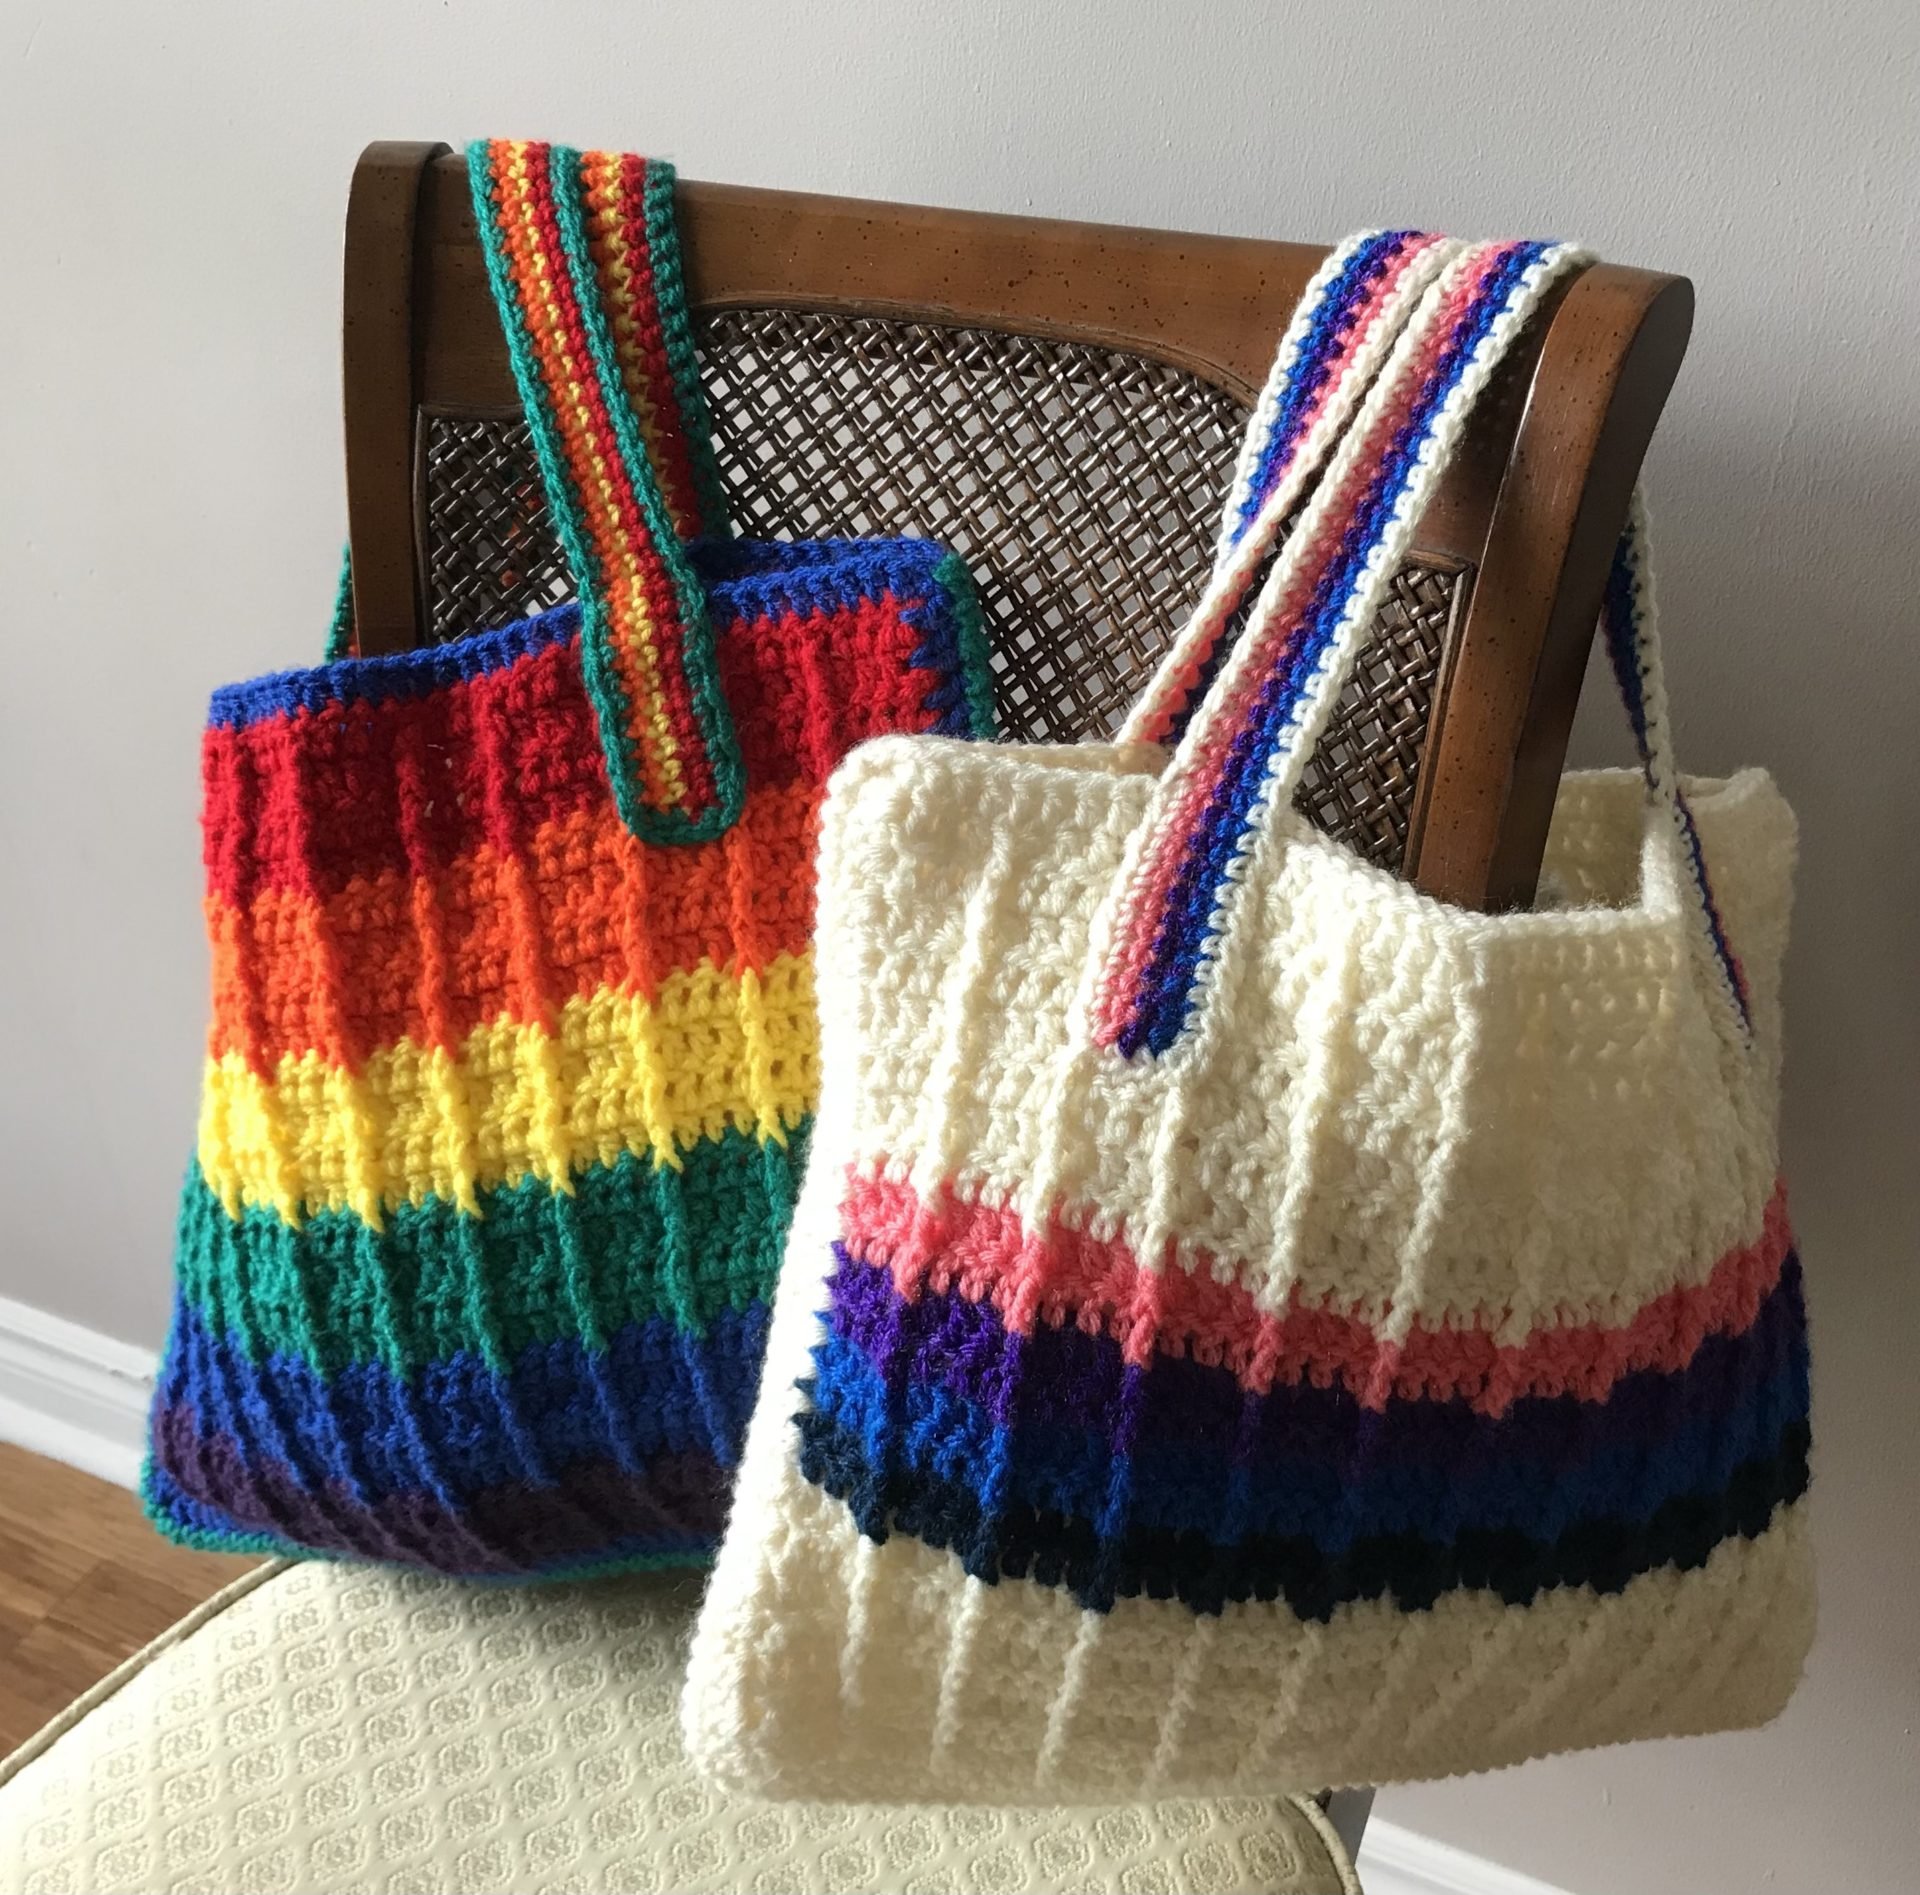 Crochet Tote Bag Pattern with Lots of Options - Artisan in the Woods